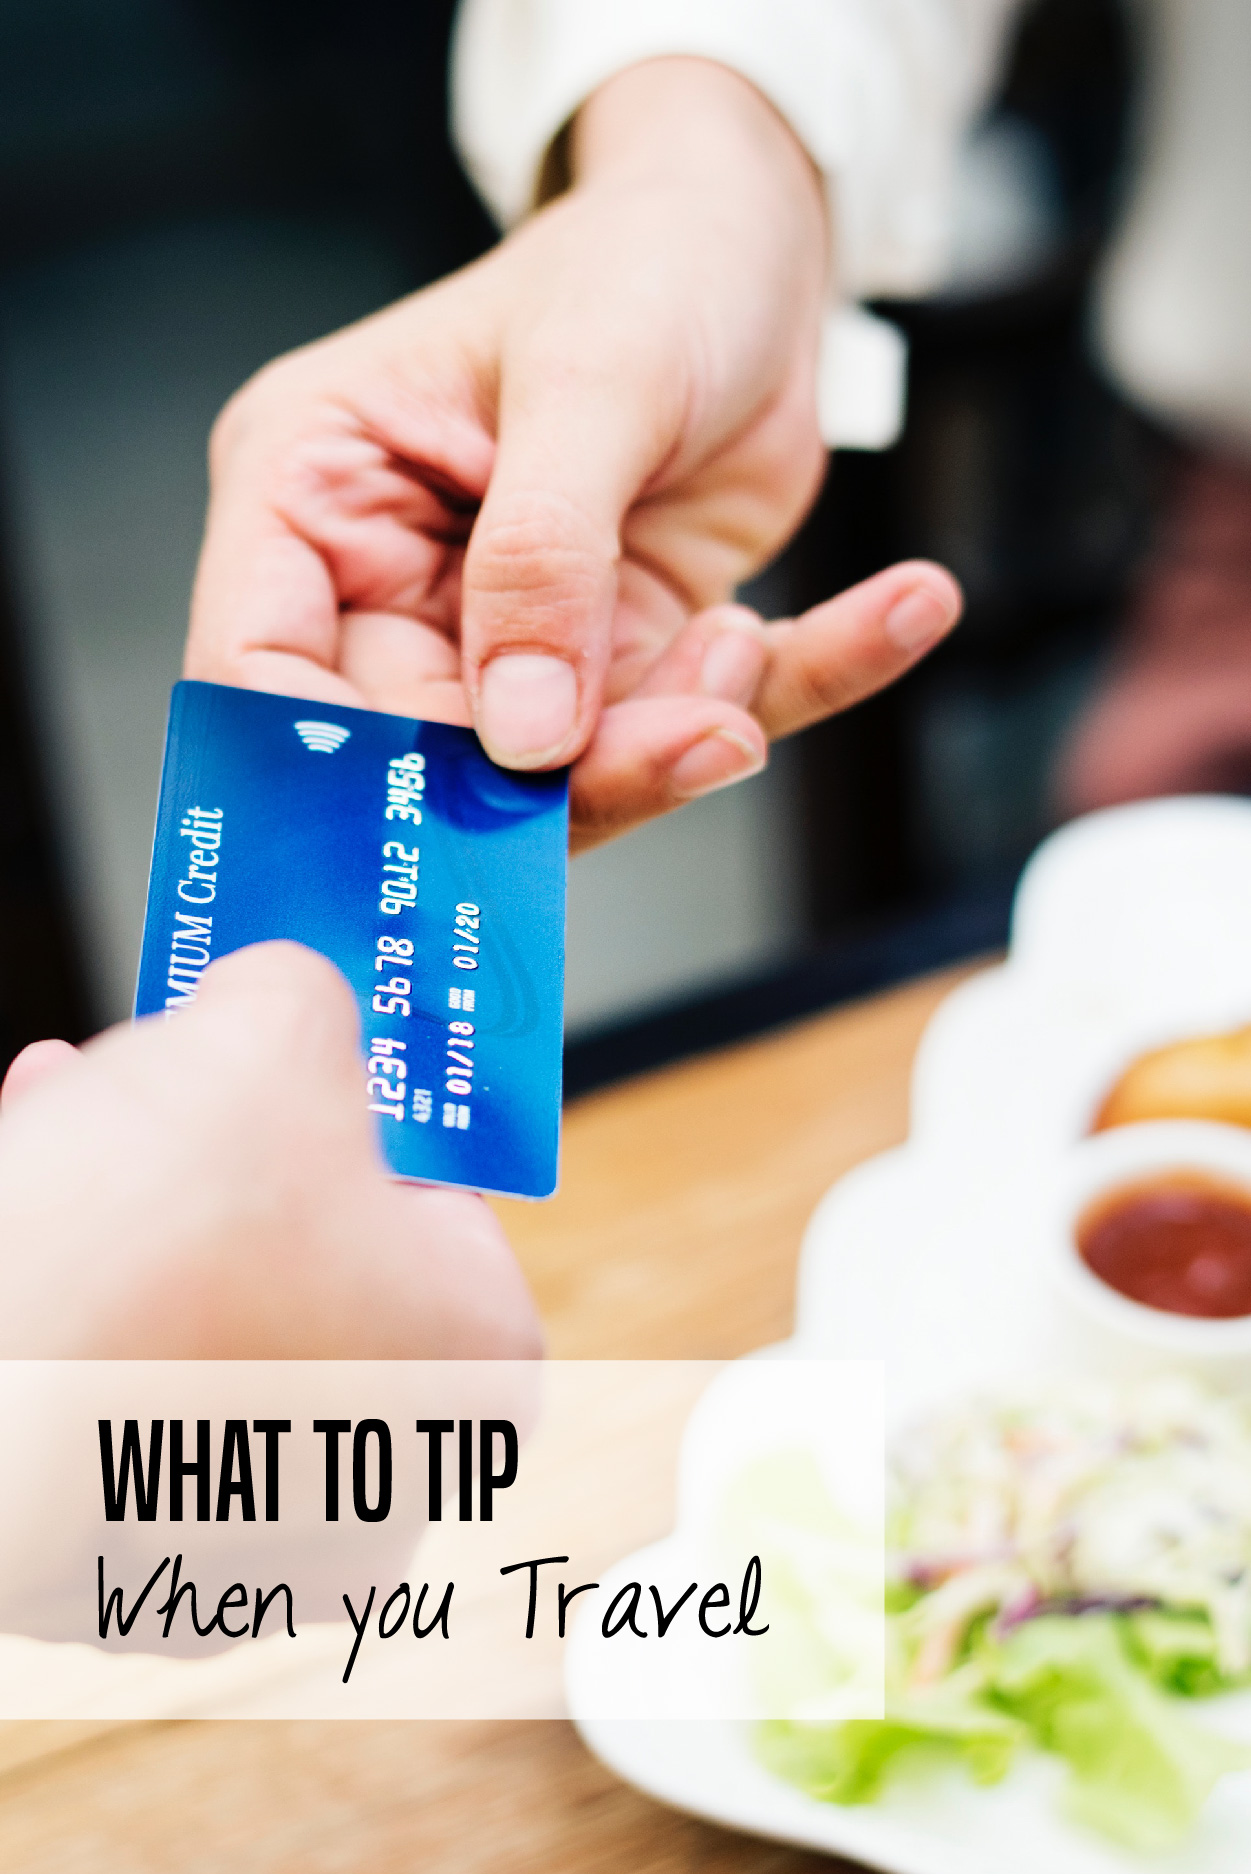 What to tip when you travel. Tips for tipping at hotels, airports, restaurants, tour guides, and more. #tipping #travel #familytravel